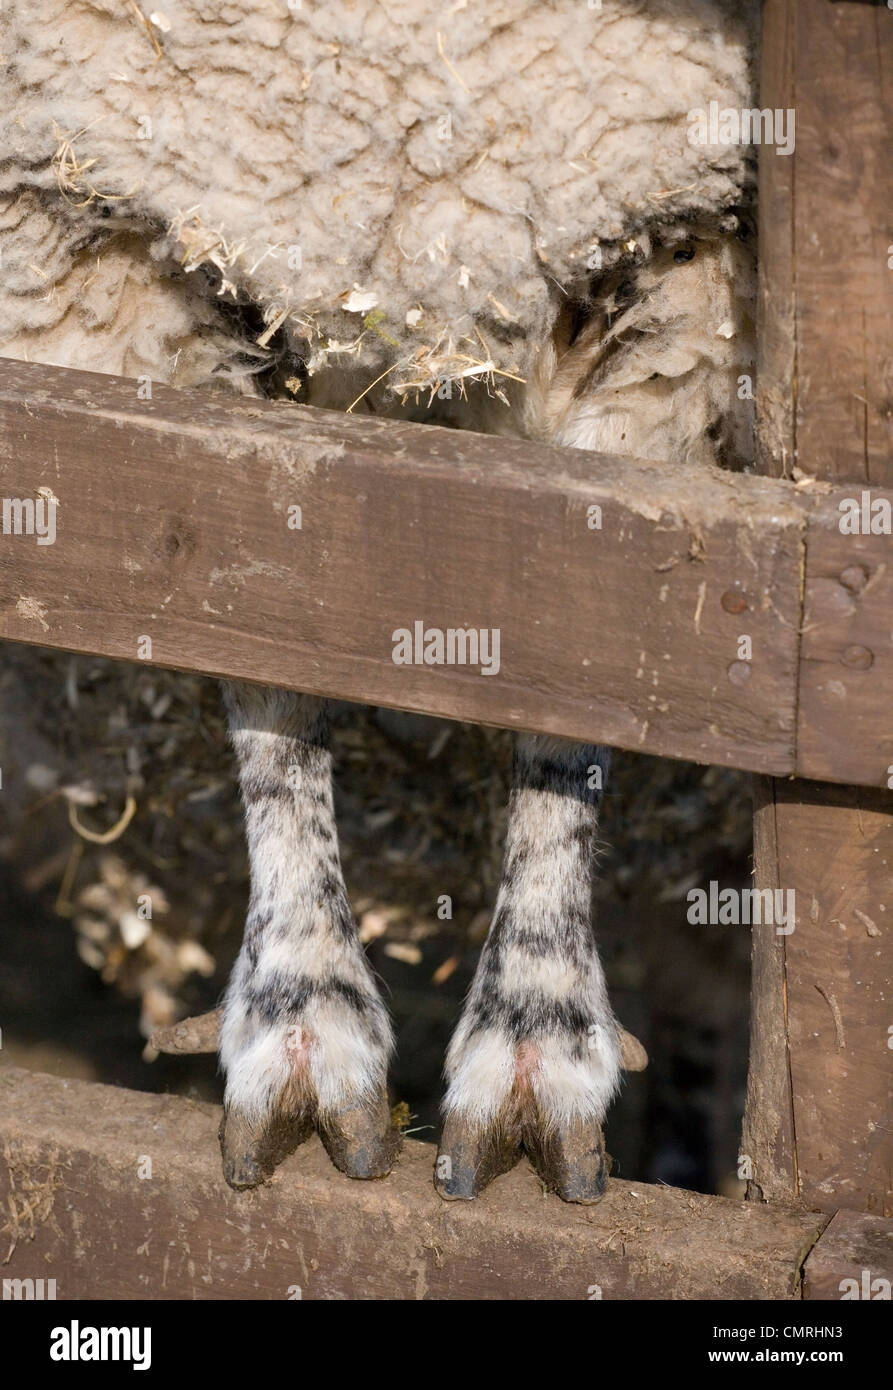 Sheep Close up of adults hooves Stock Photo